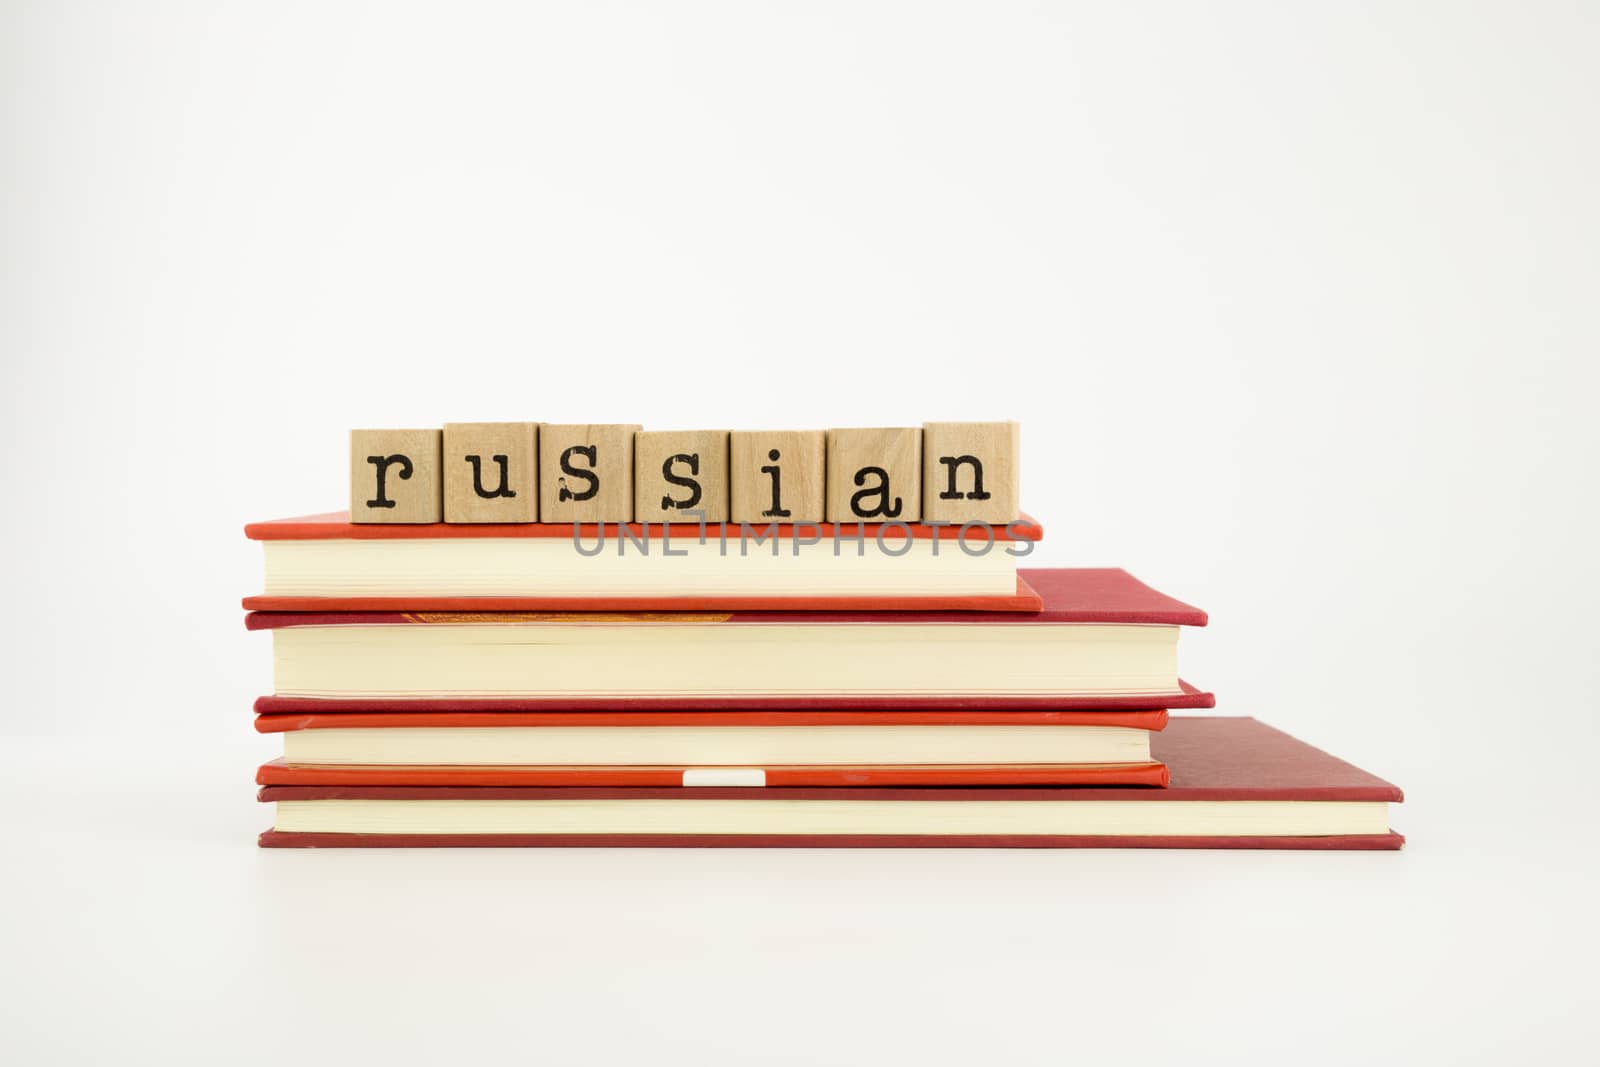 russian word on wood stamps stack on books, language and academic concept